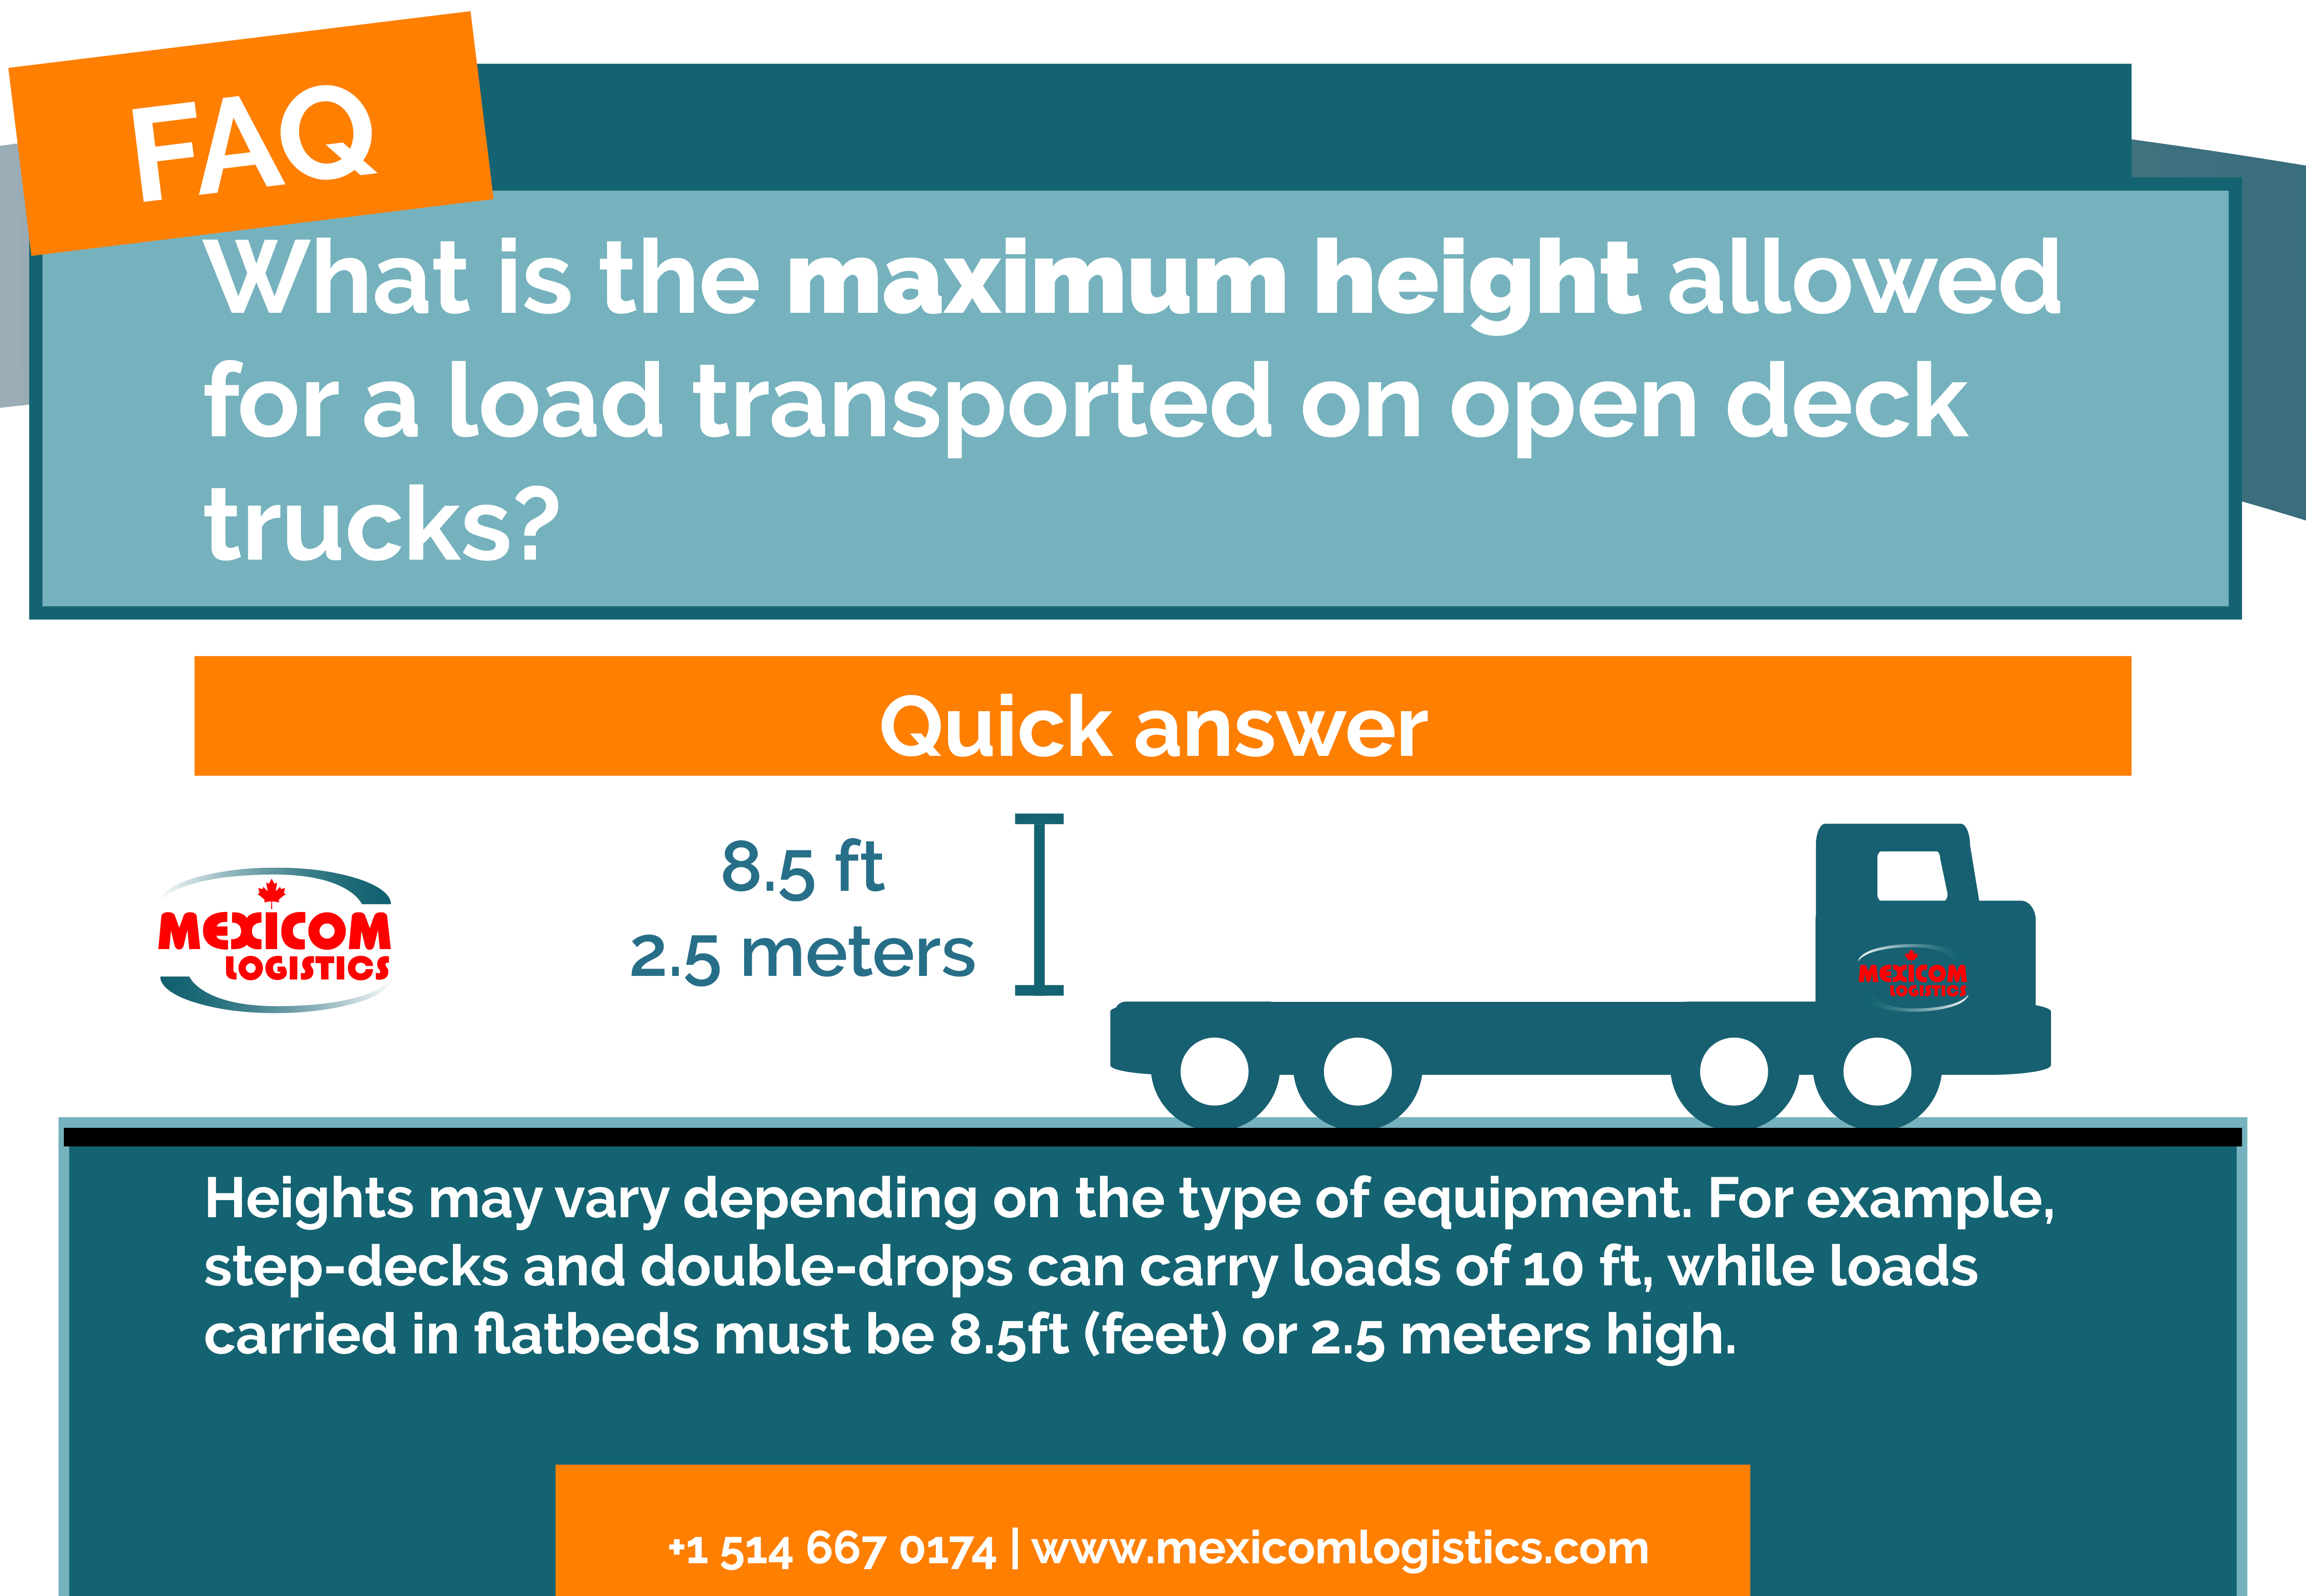 What is the maximum height allowed for a load transported on open deck trucks?